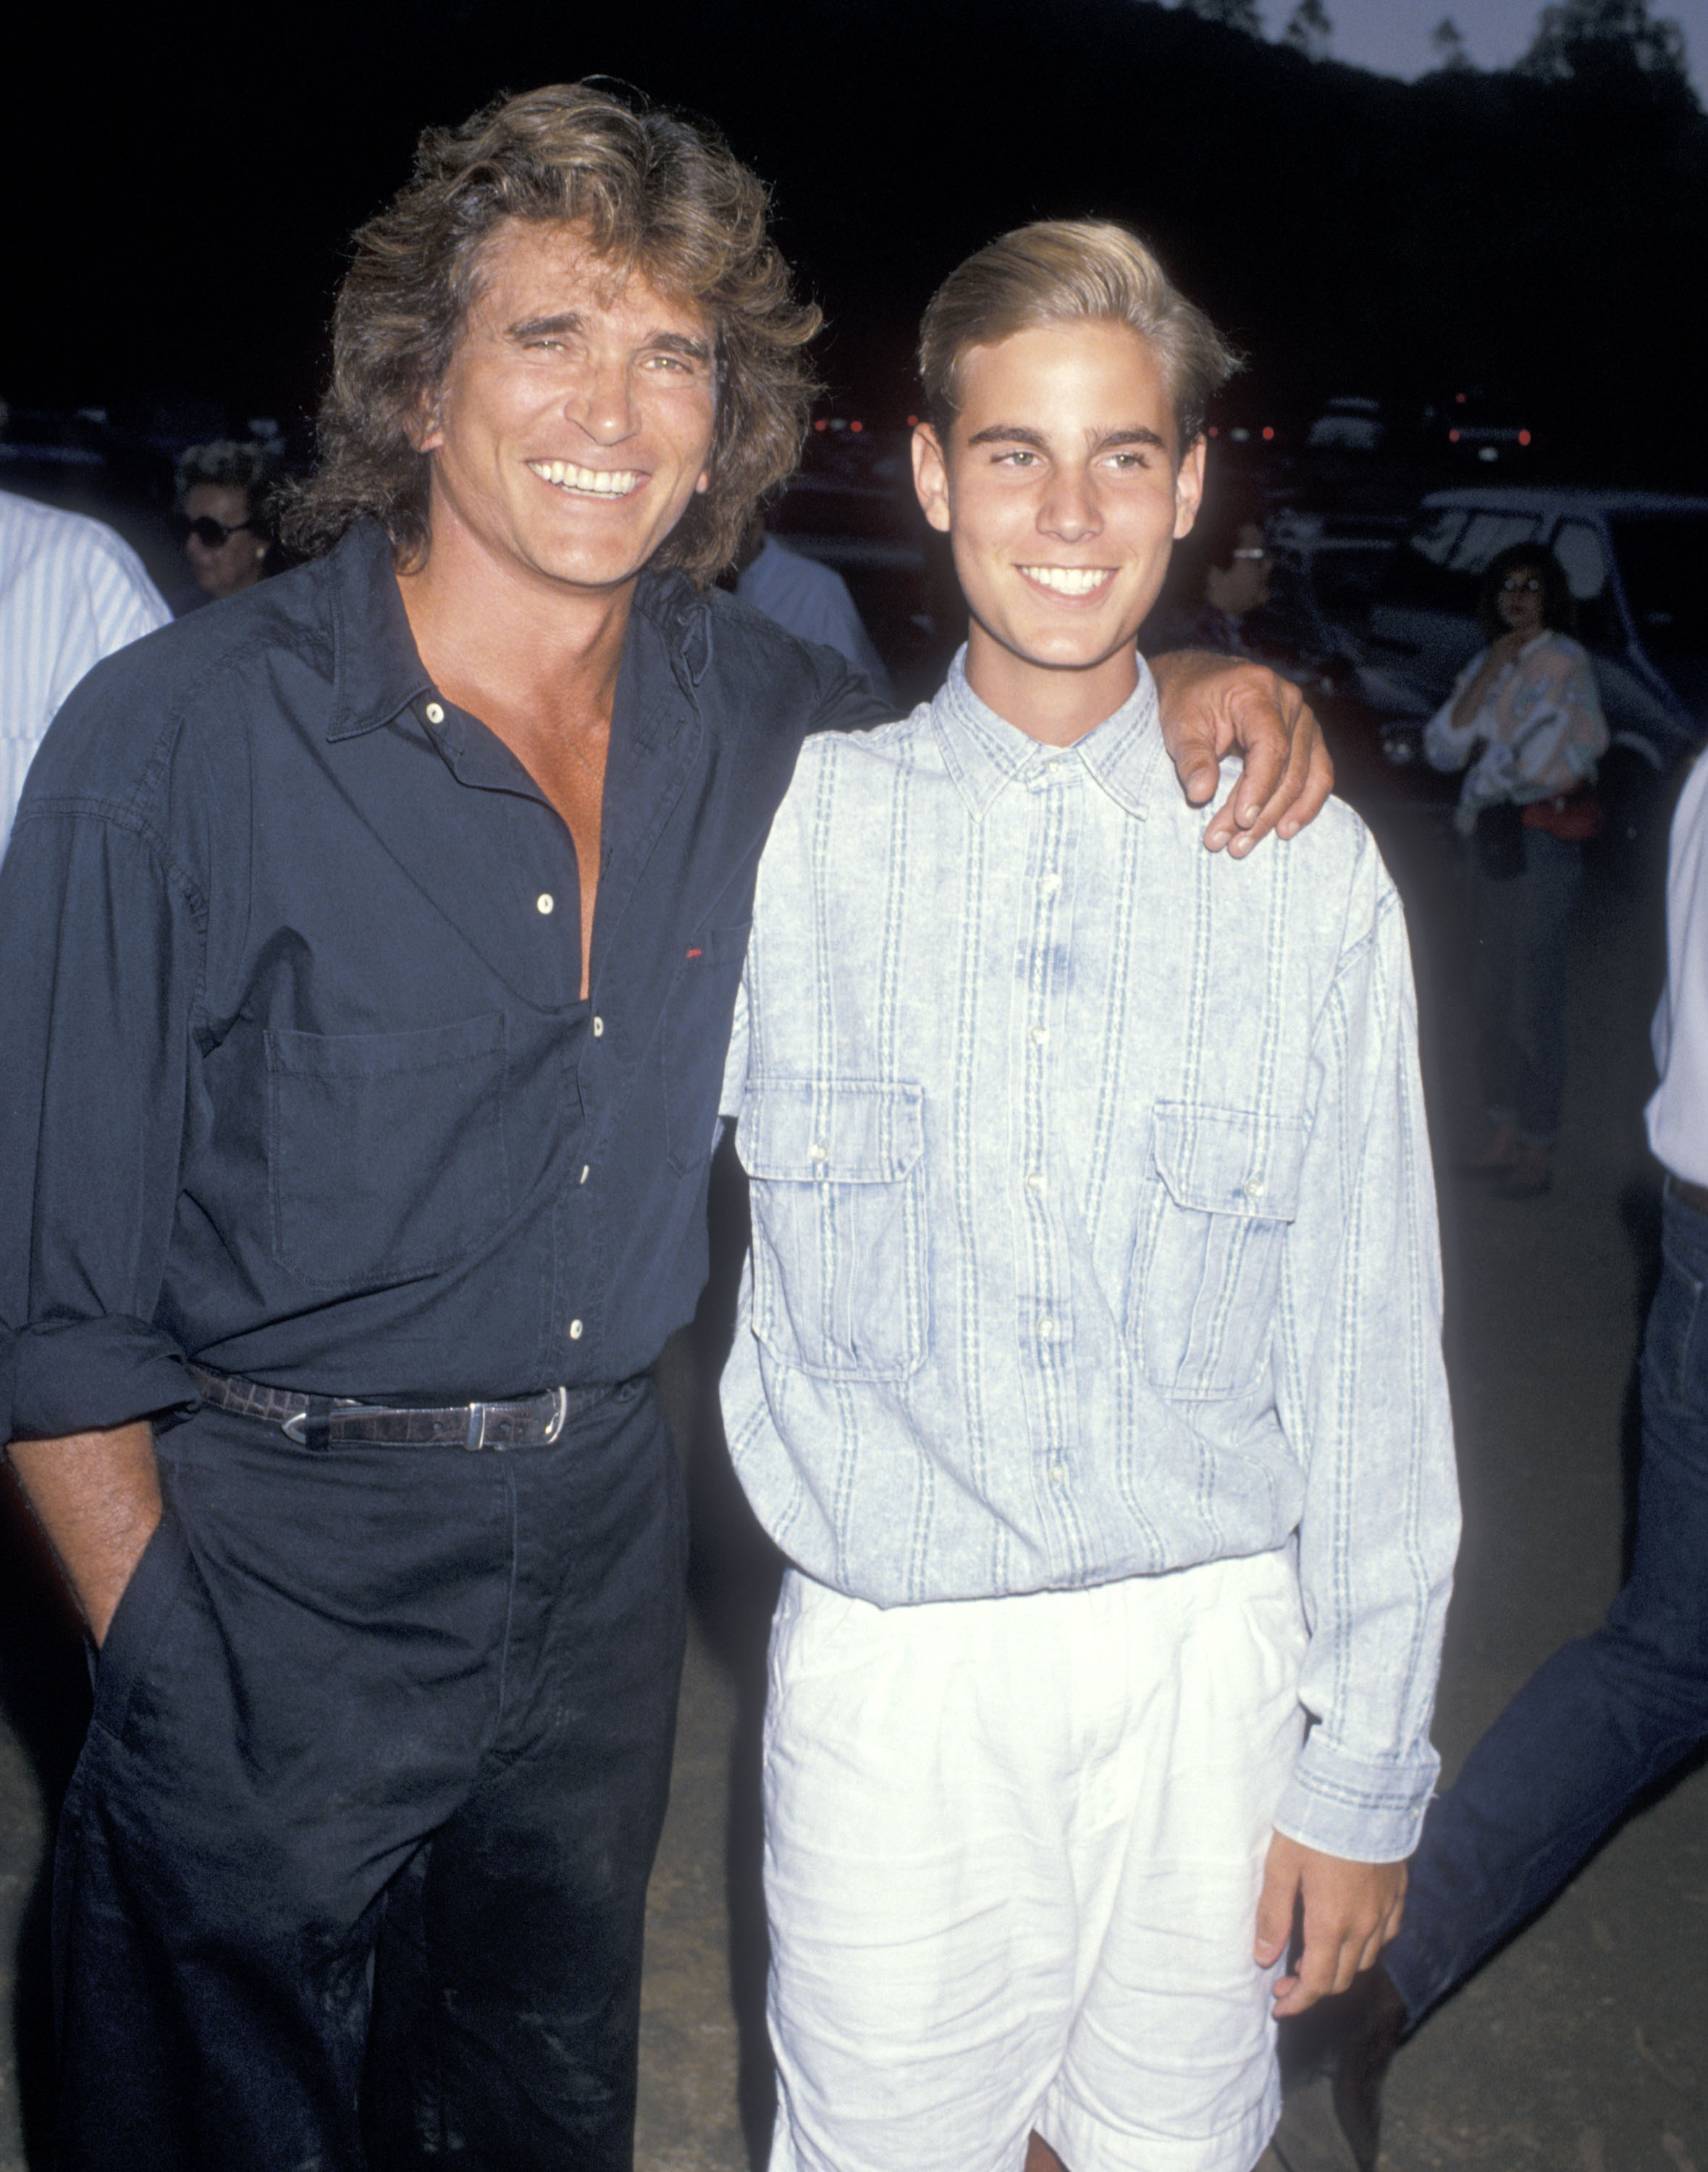 Michael Landon and Christopher Landon attend the Third Annual Moonlight Roundup Extravaganza at the Calamigos Ranch on July 29, 1989 in Malibu, California. | Source: Getty Images